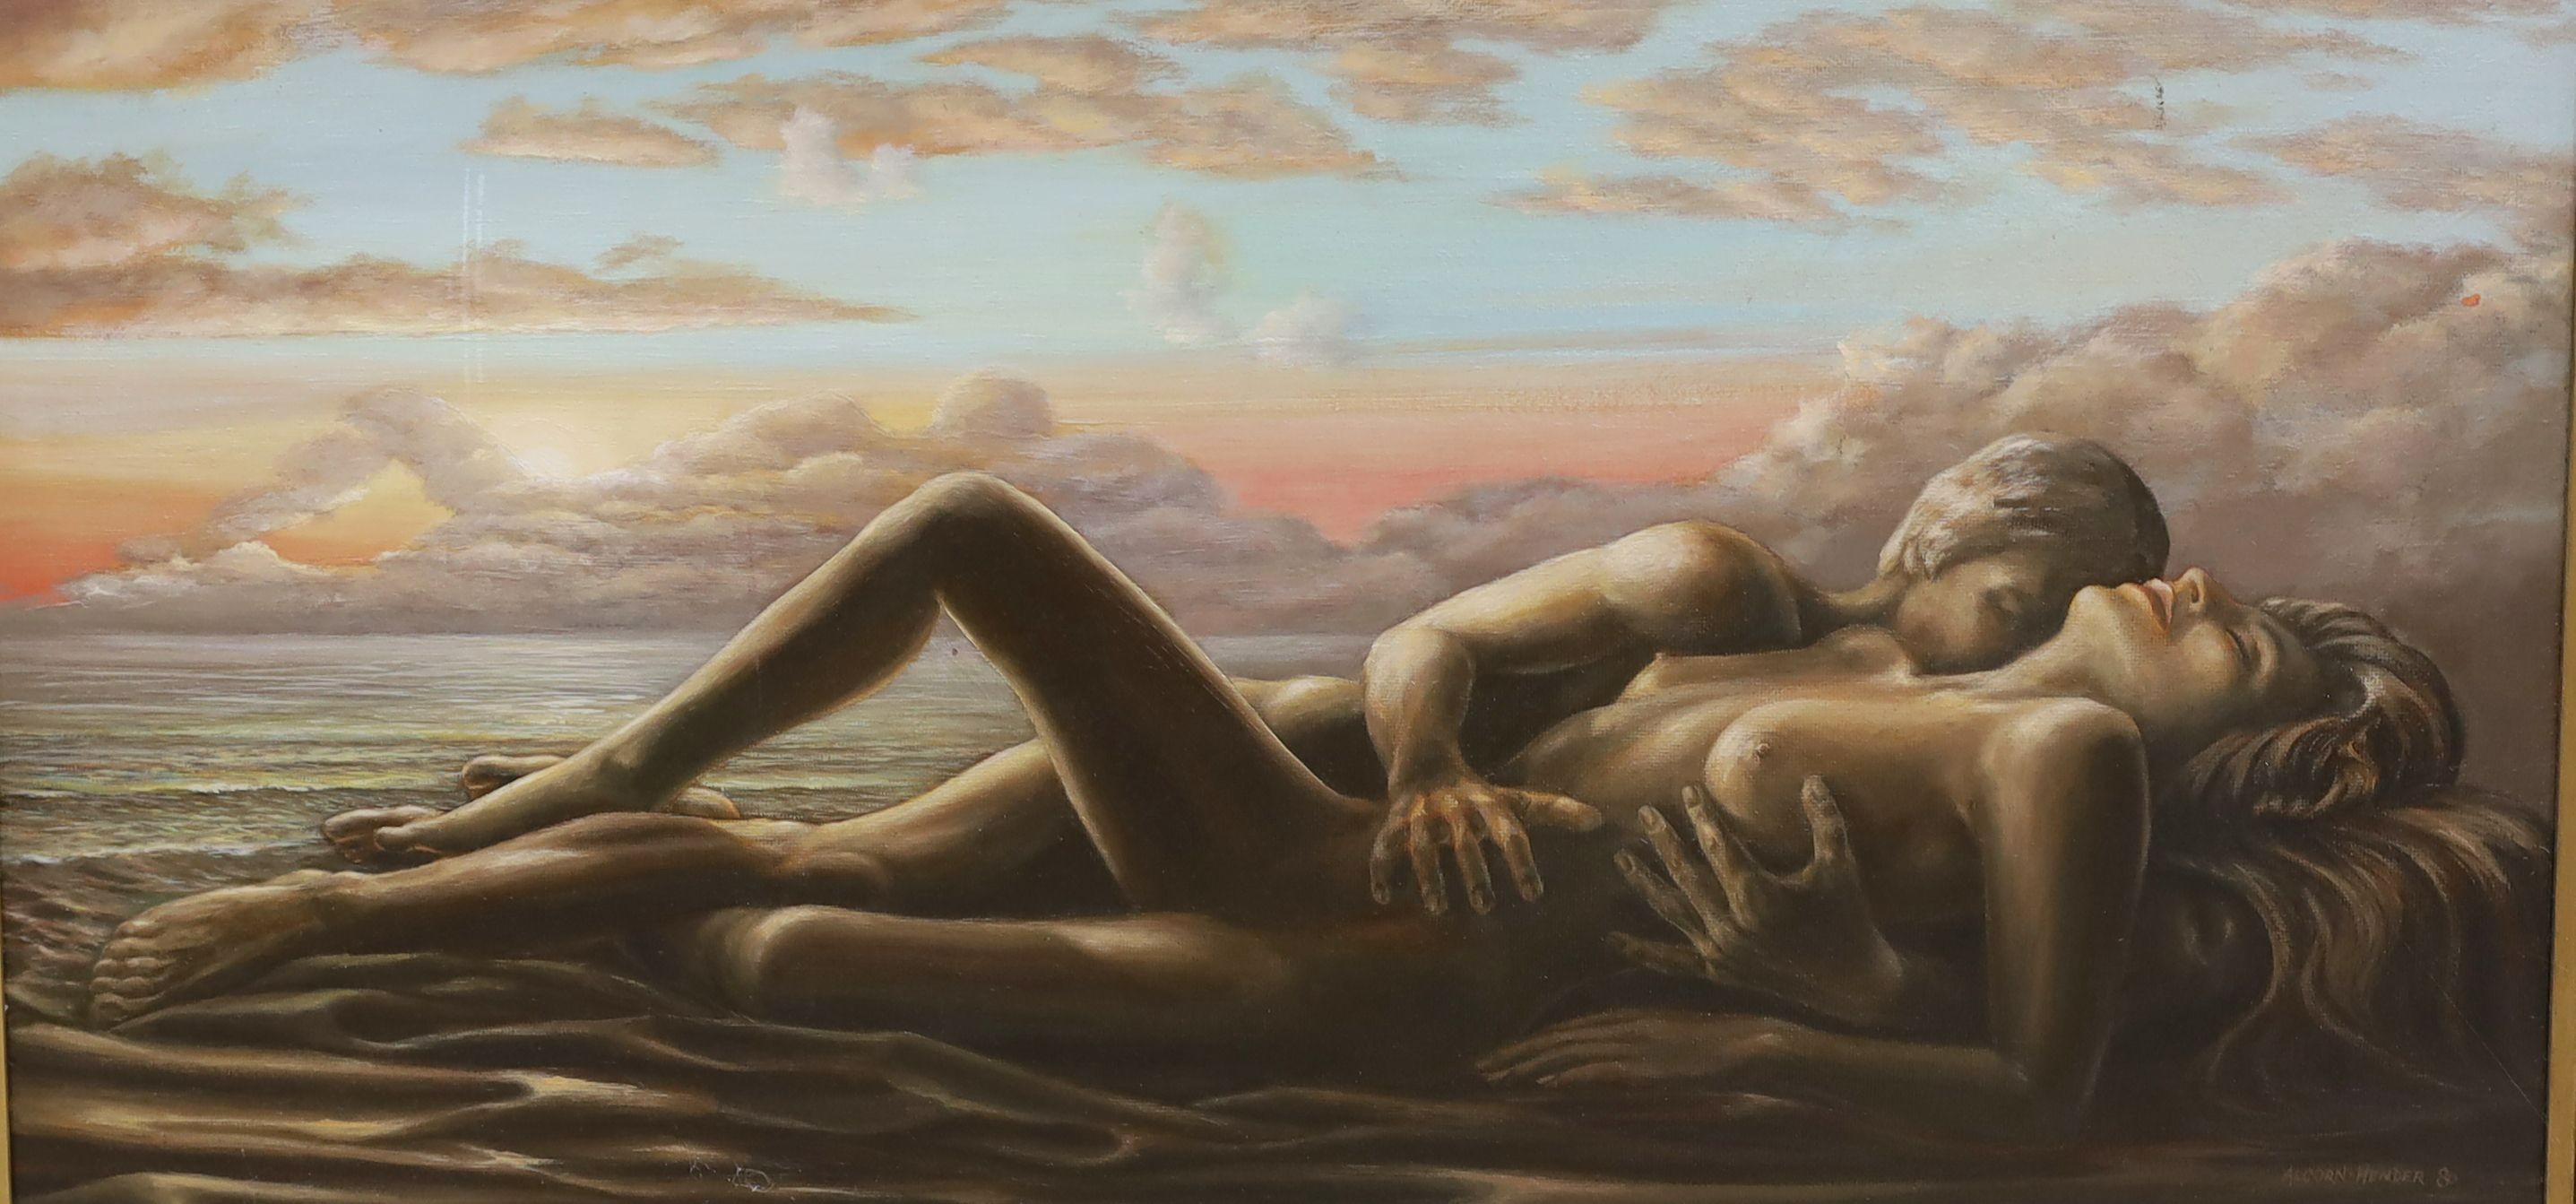 Michael Alcorn-Hender (1945-), oil on board, Embracing nudes on the seashore, signed and dated '80, 49 x 100cm